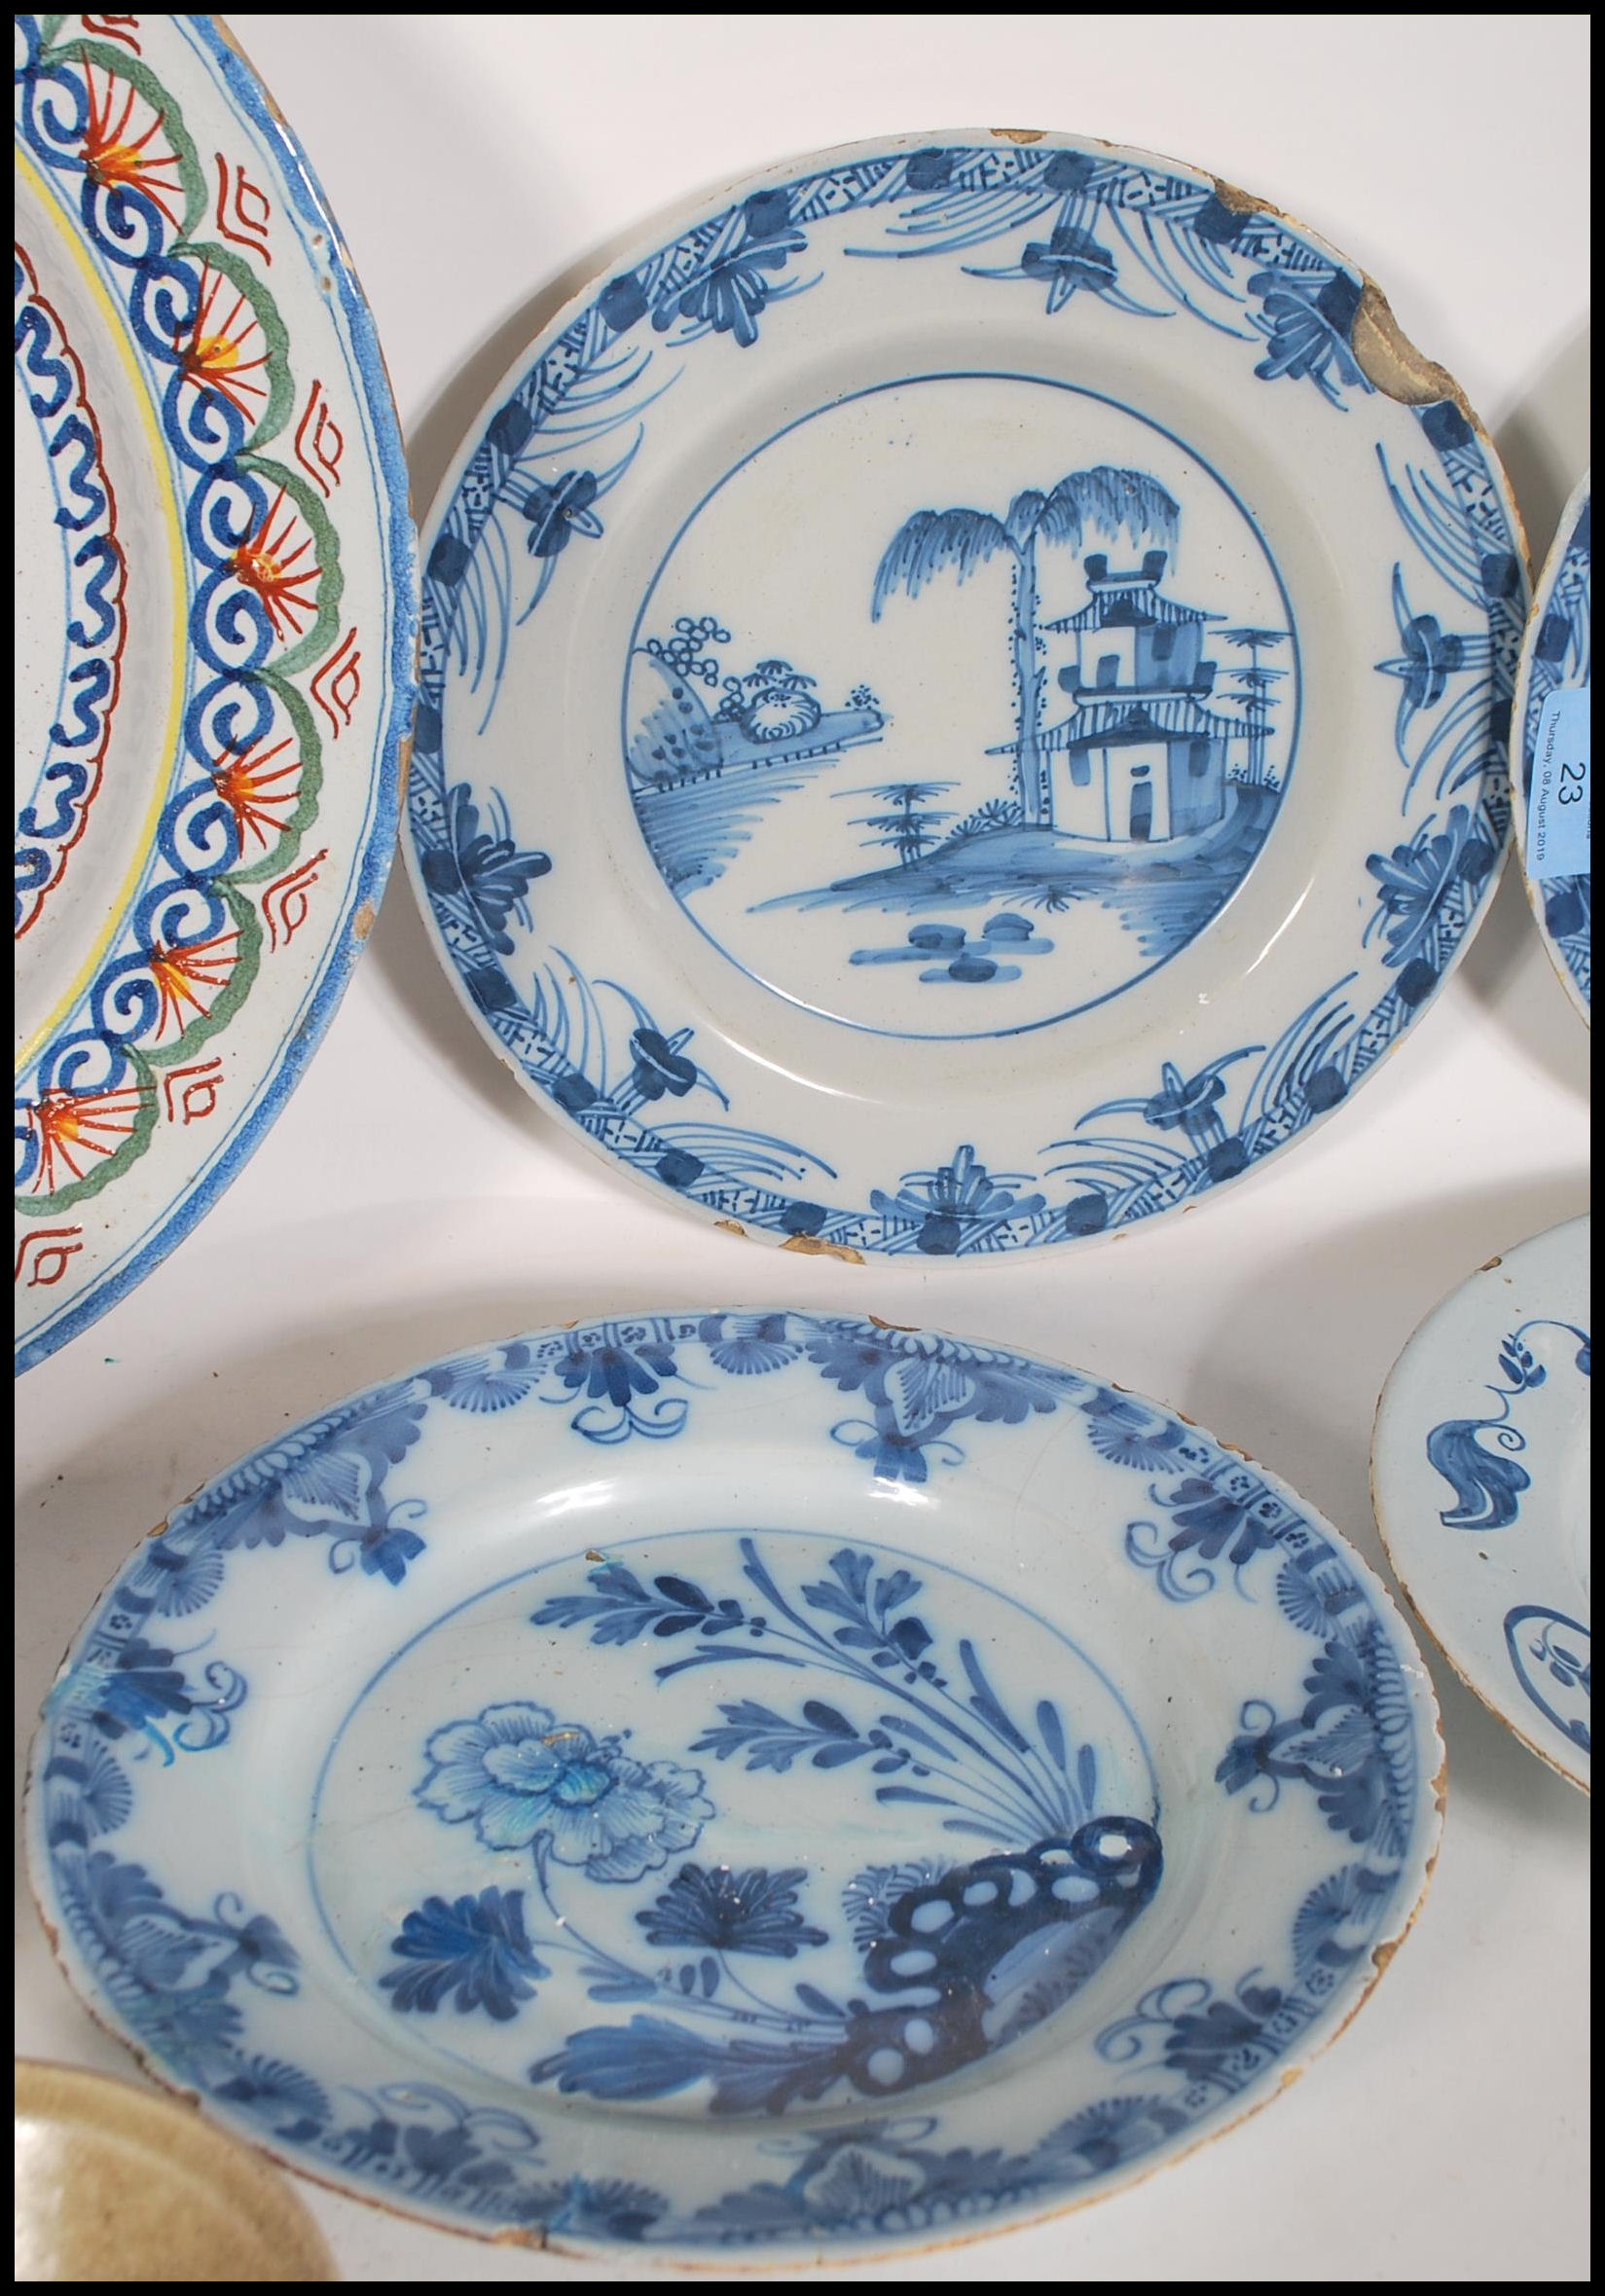 A collection of 18th century and 19th century Delft to include an 18th century blue and white dragon - Image 6 of 7